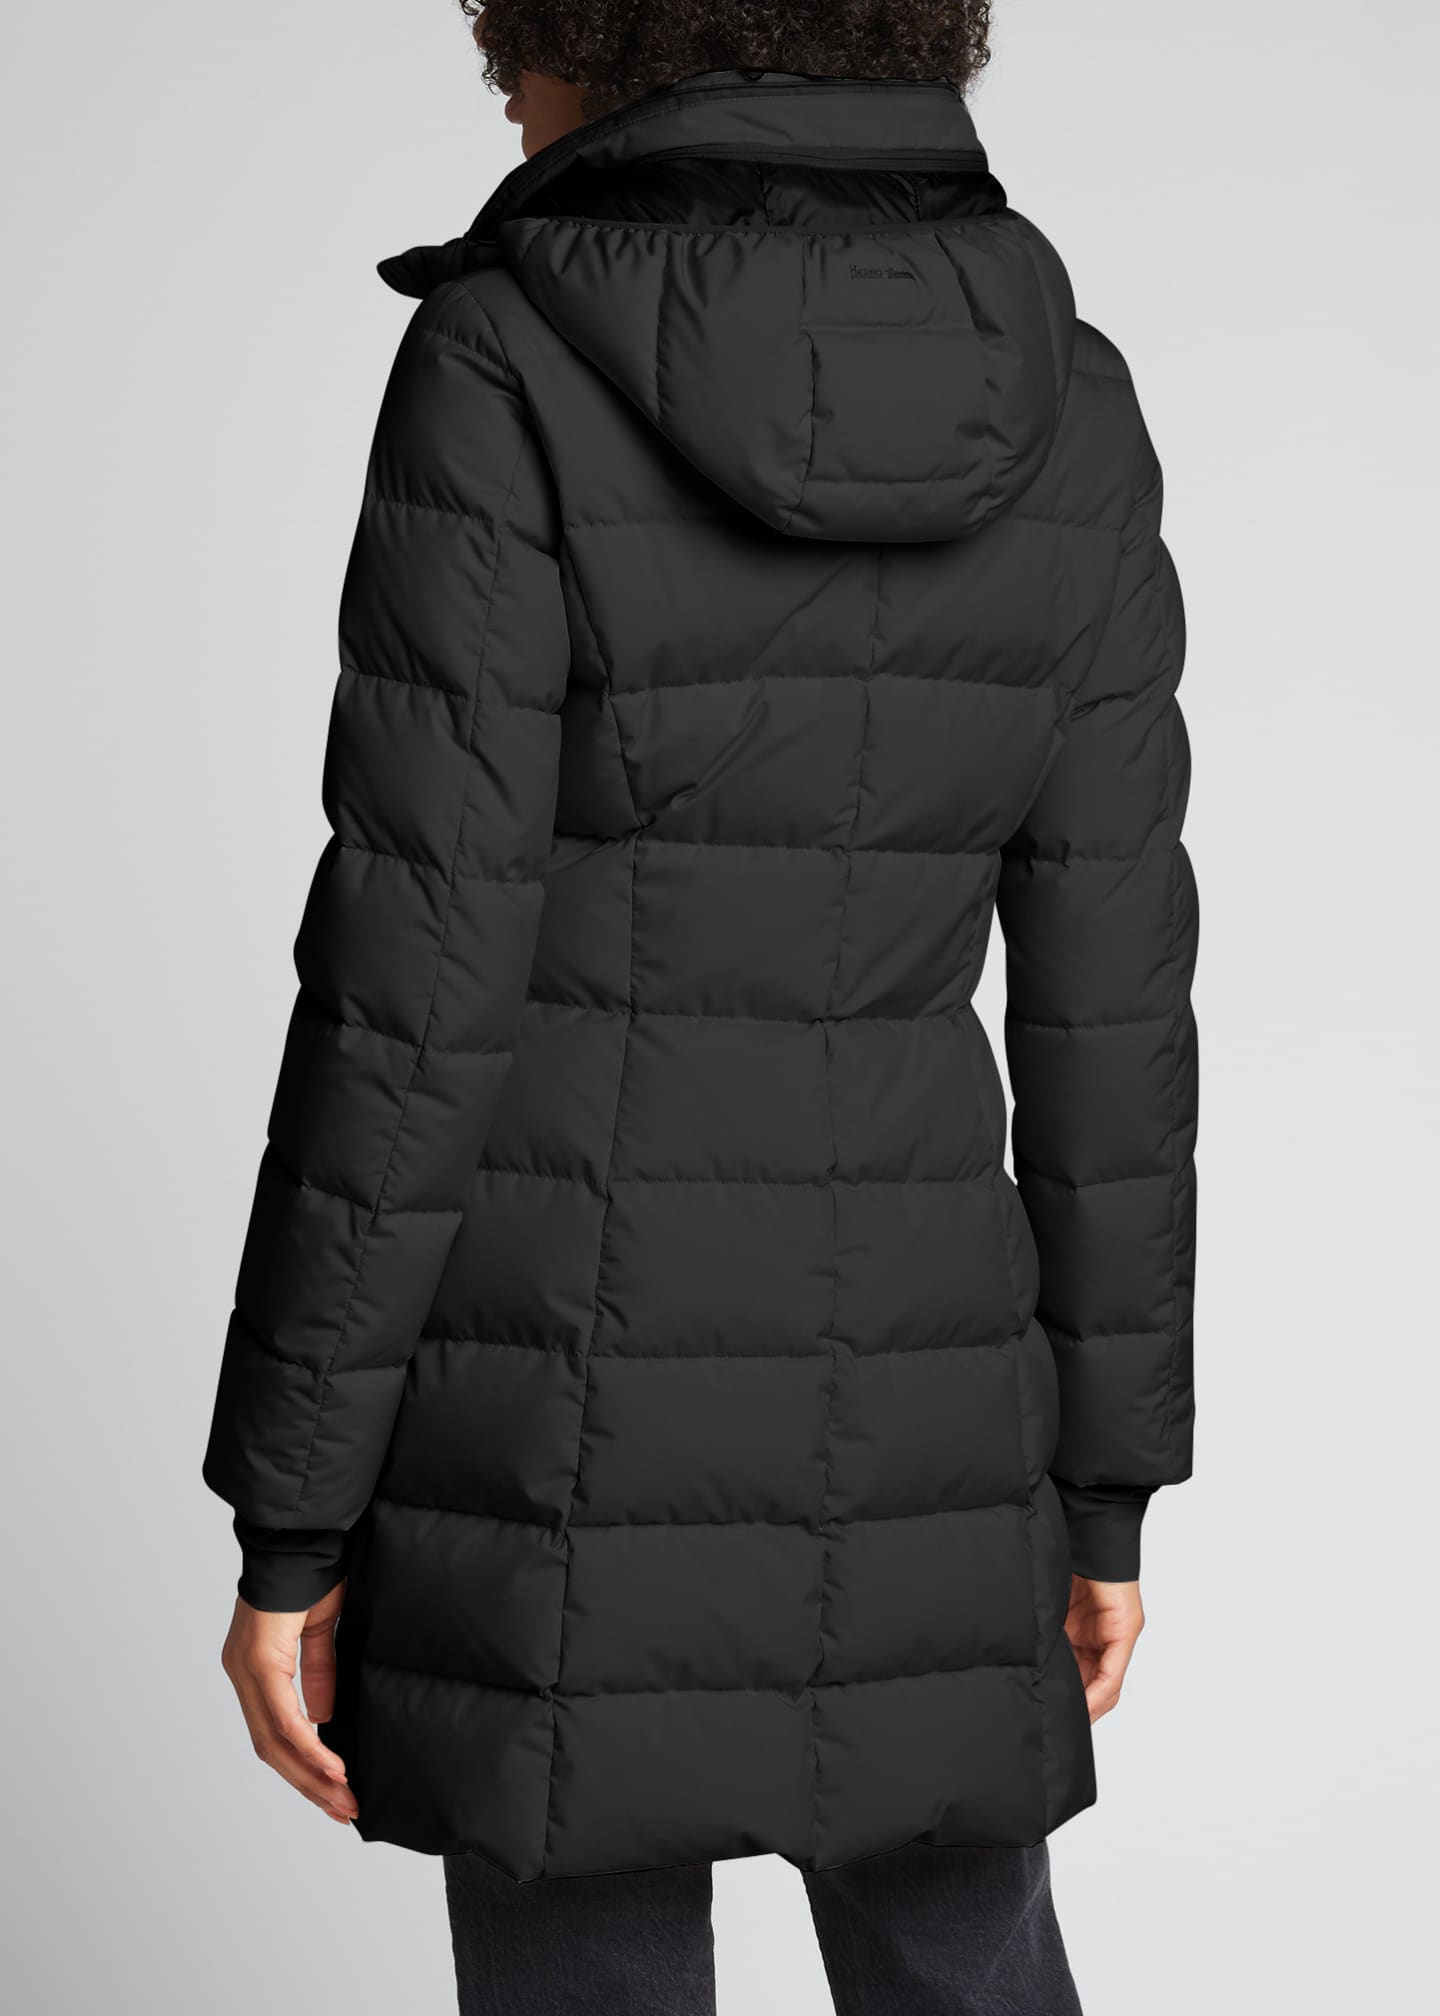 Herno Long Fitted Puffer Coat with Thumbholes - Bergdorf Goodman